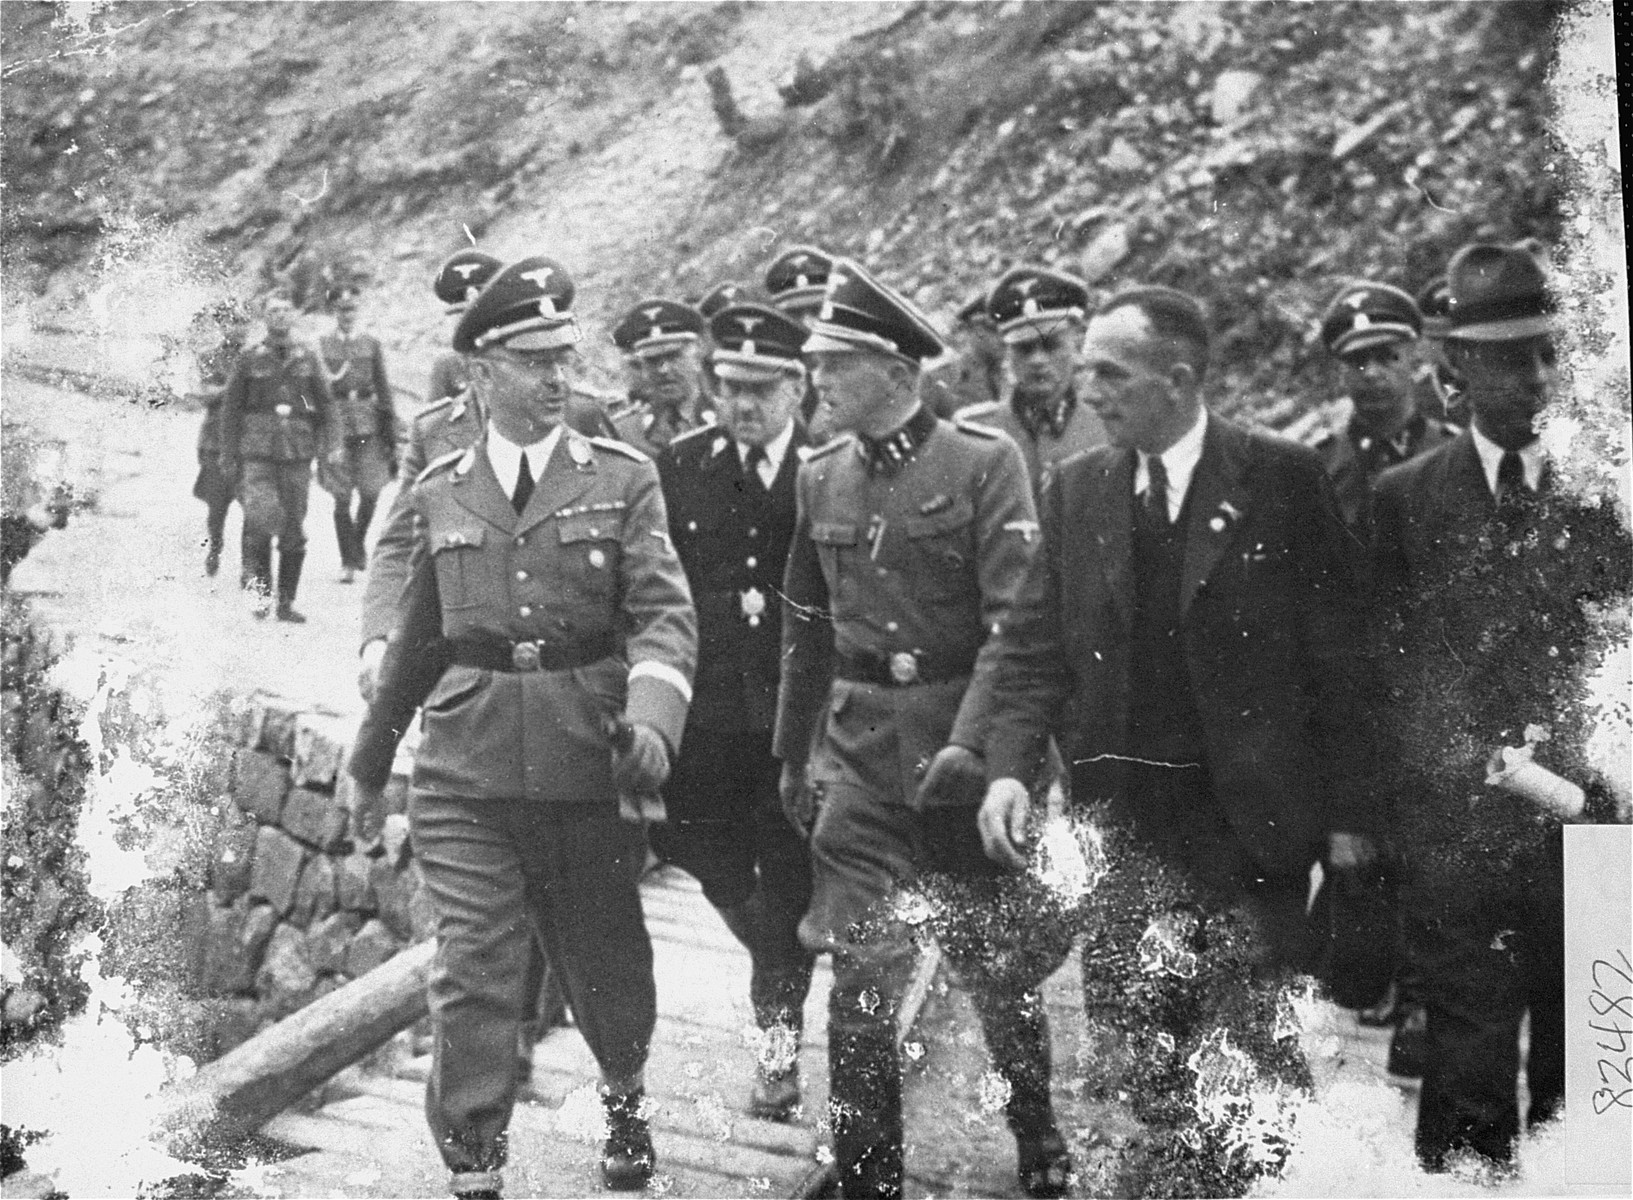 Reichsfuehrer SS Heinrich Himmler and his entourage inspect the Wiener Graben quarry during an official tour of the Mauthausen concentration camp.

Pictured in front from left to right are: Heinrich Himmler,  August Eigruber and Franz Ziereis.  Visible between and behind Himmler and Eigruber is Oswald Pohl.